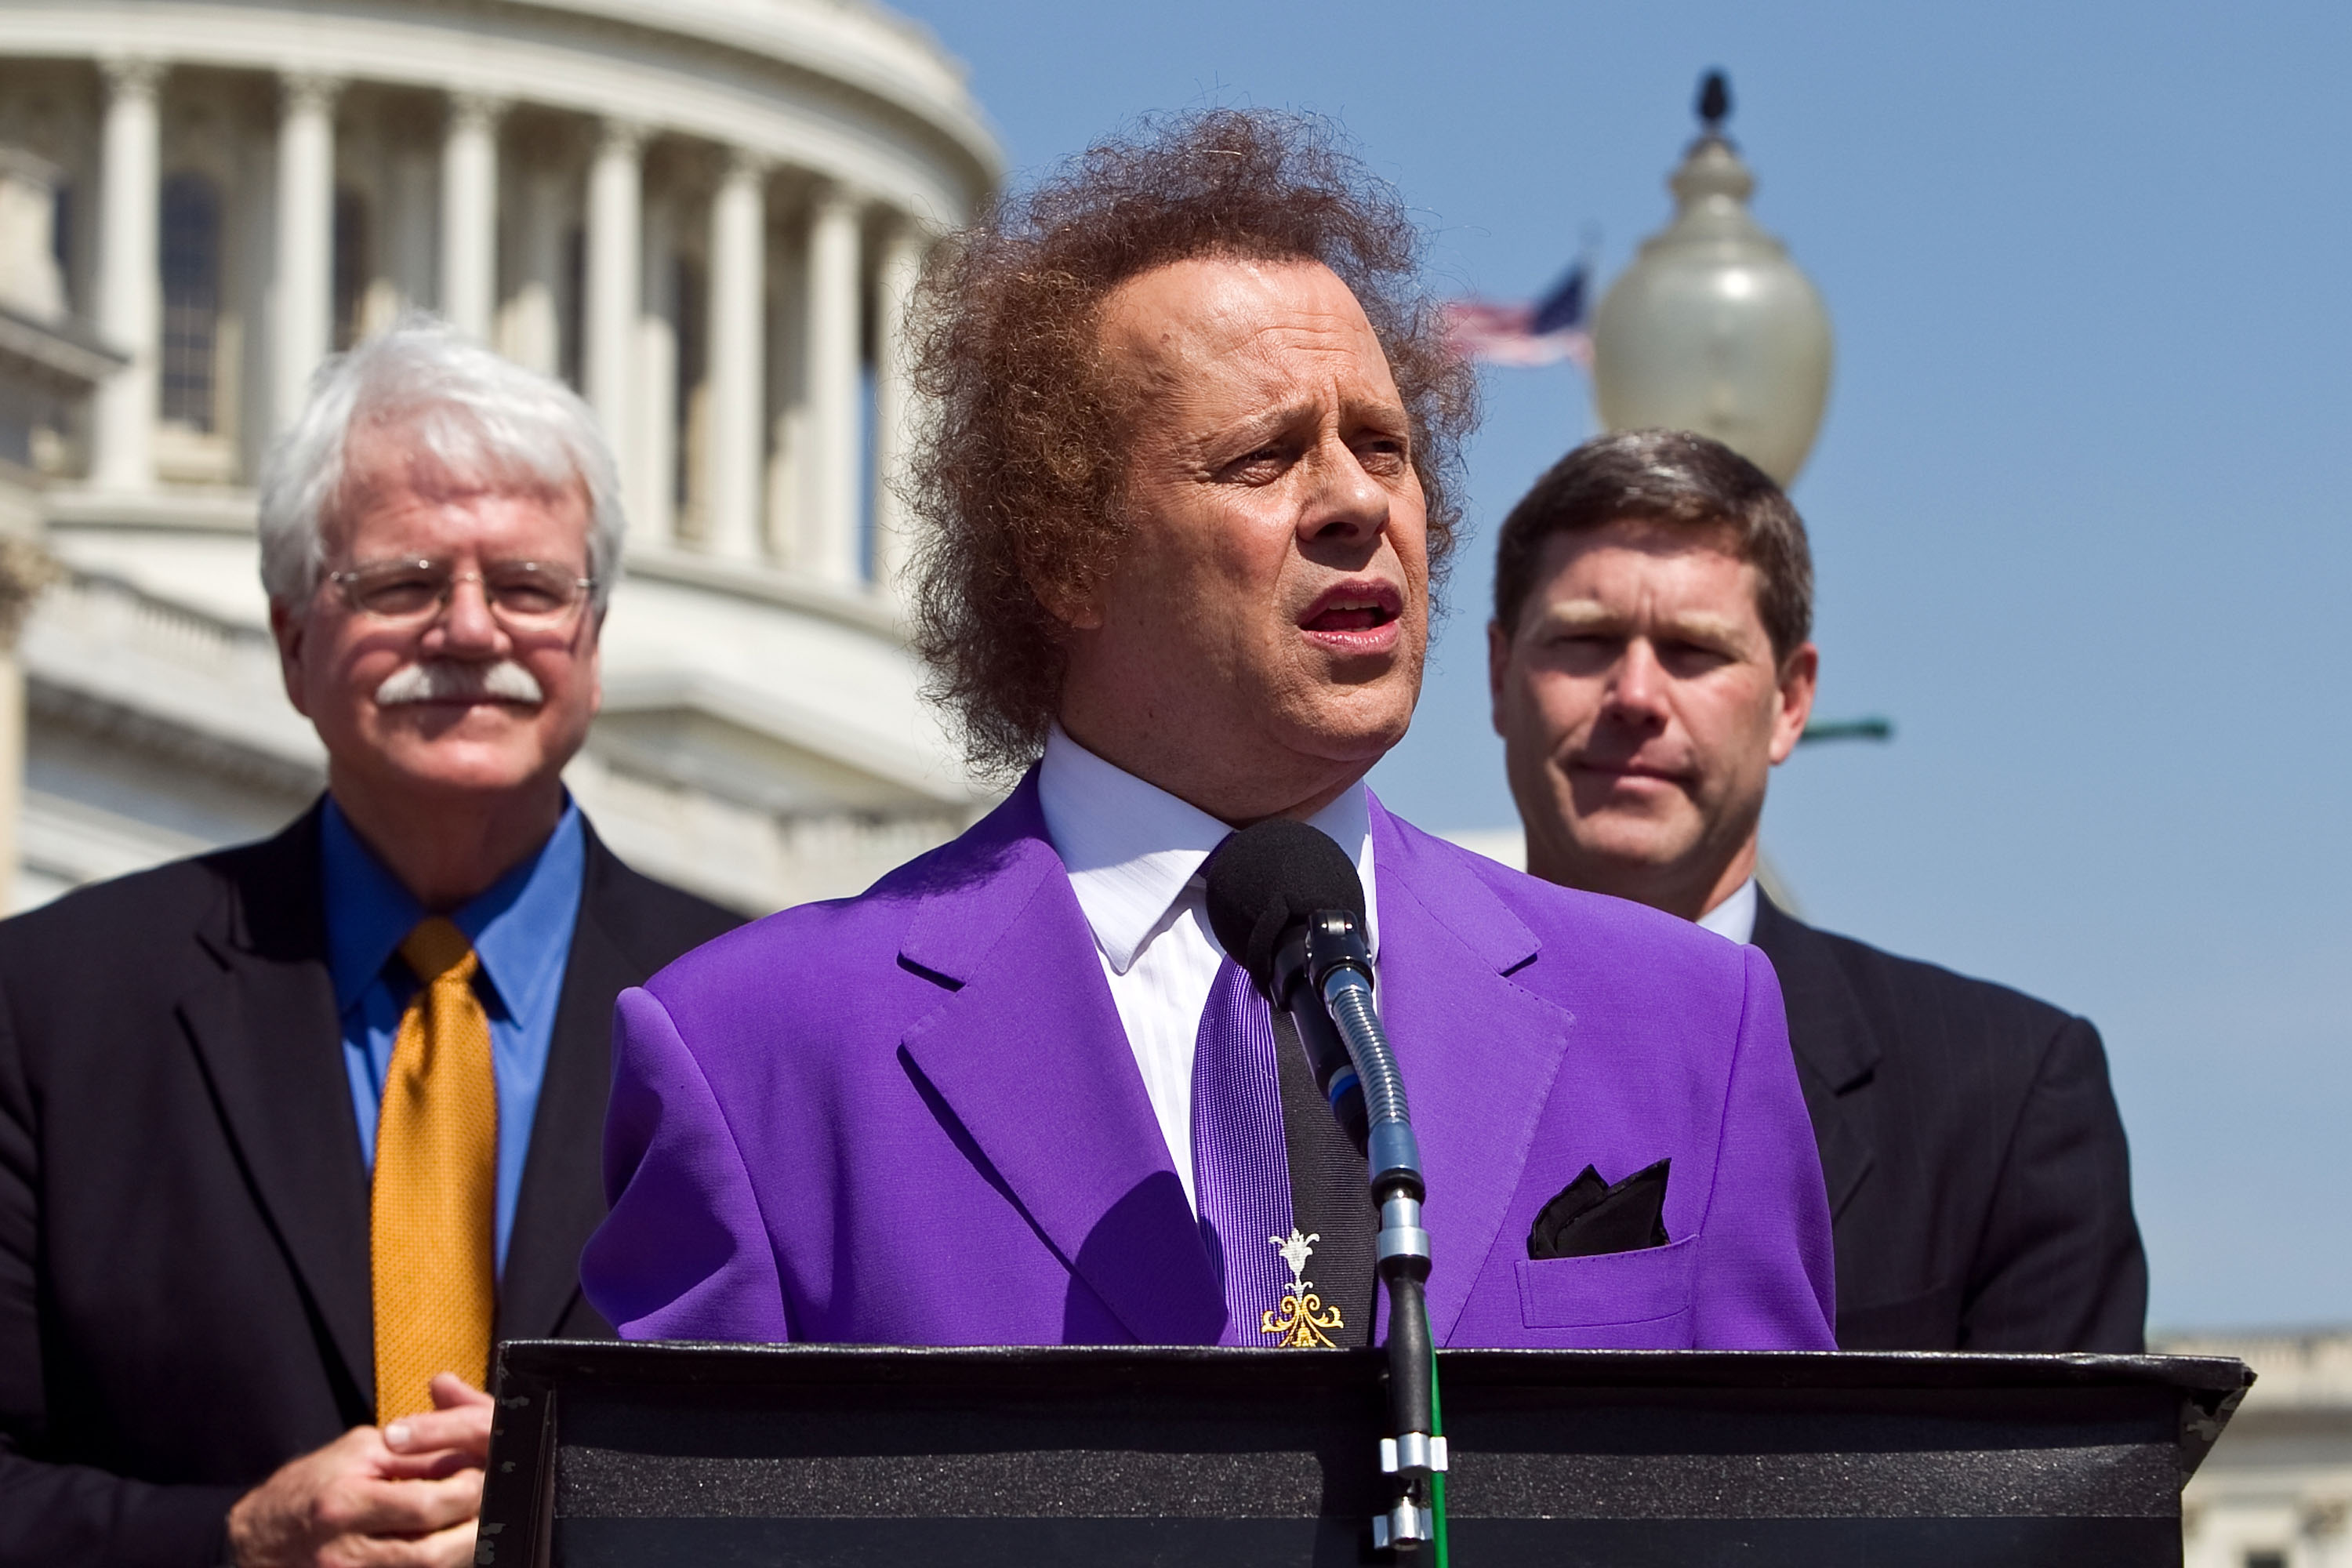 Richard Simmons (c), along with members of Congress at the US Capitol on April 22, 2010, in Washington, DC | Source: Getty Images